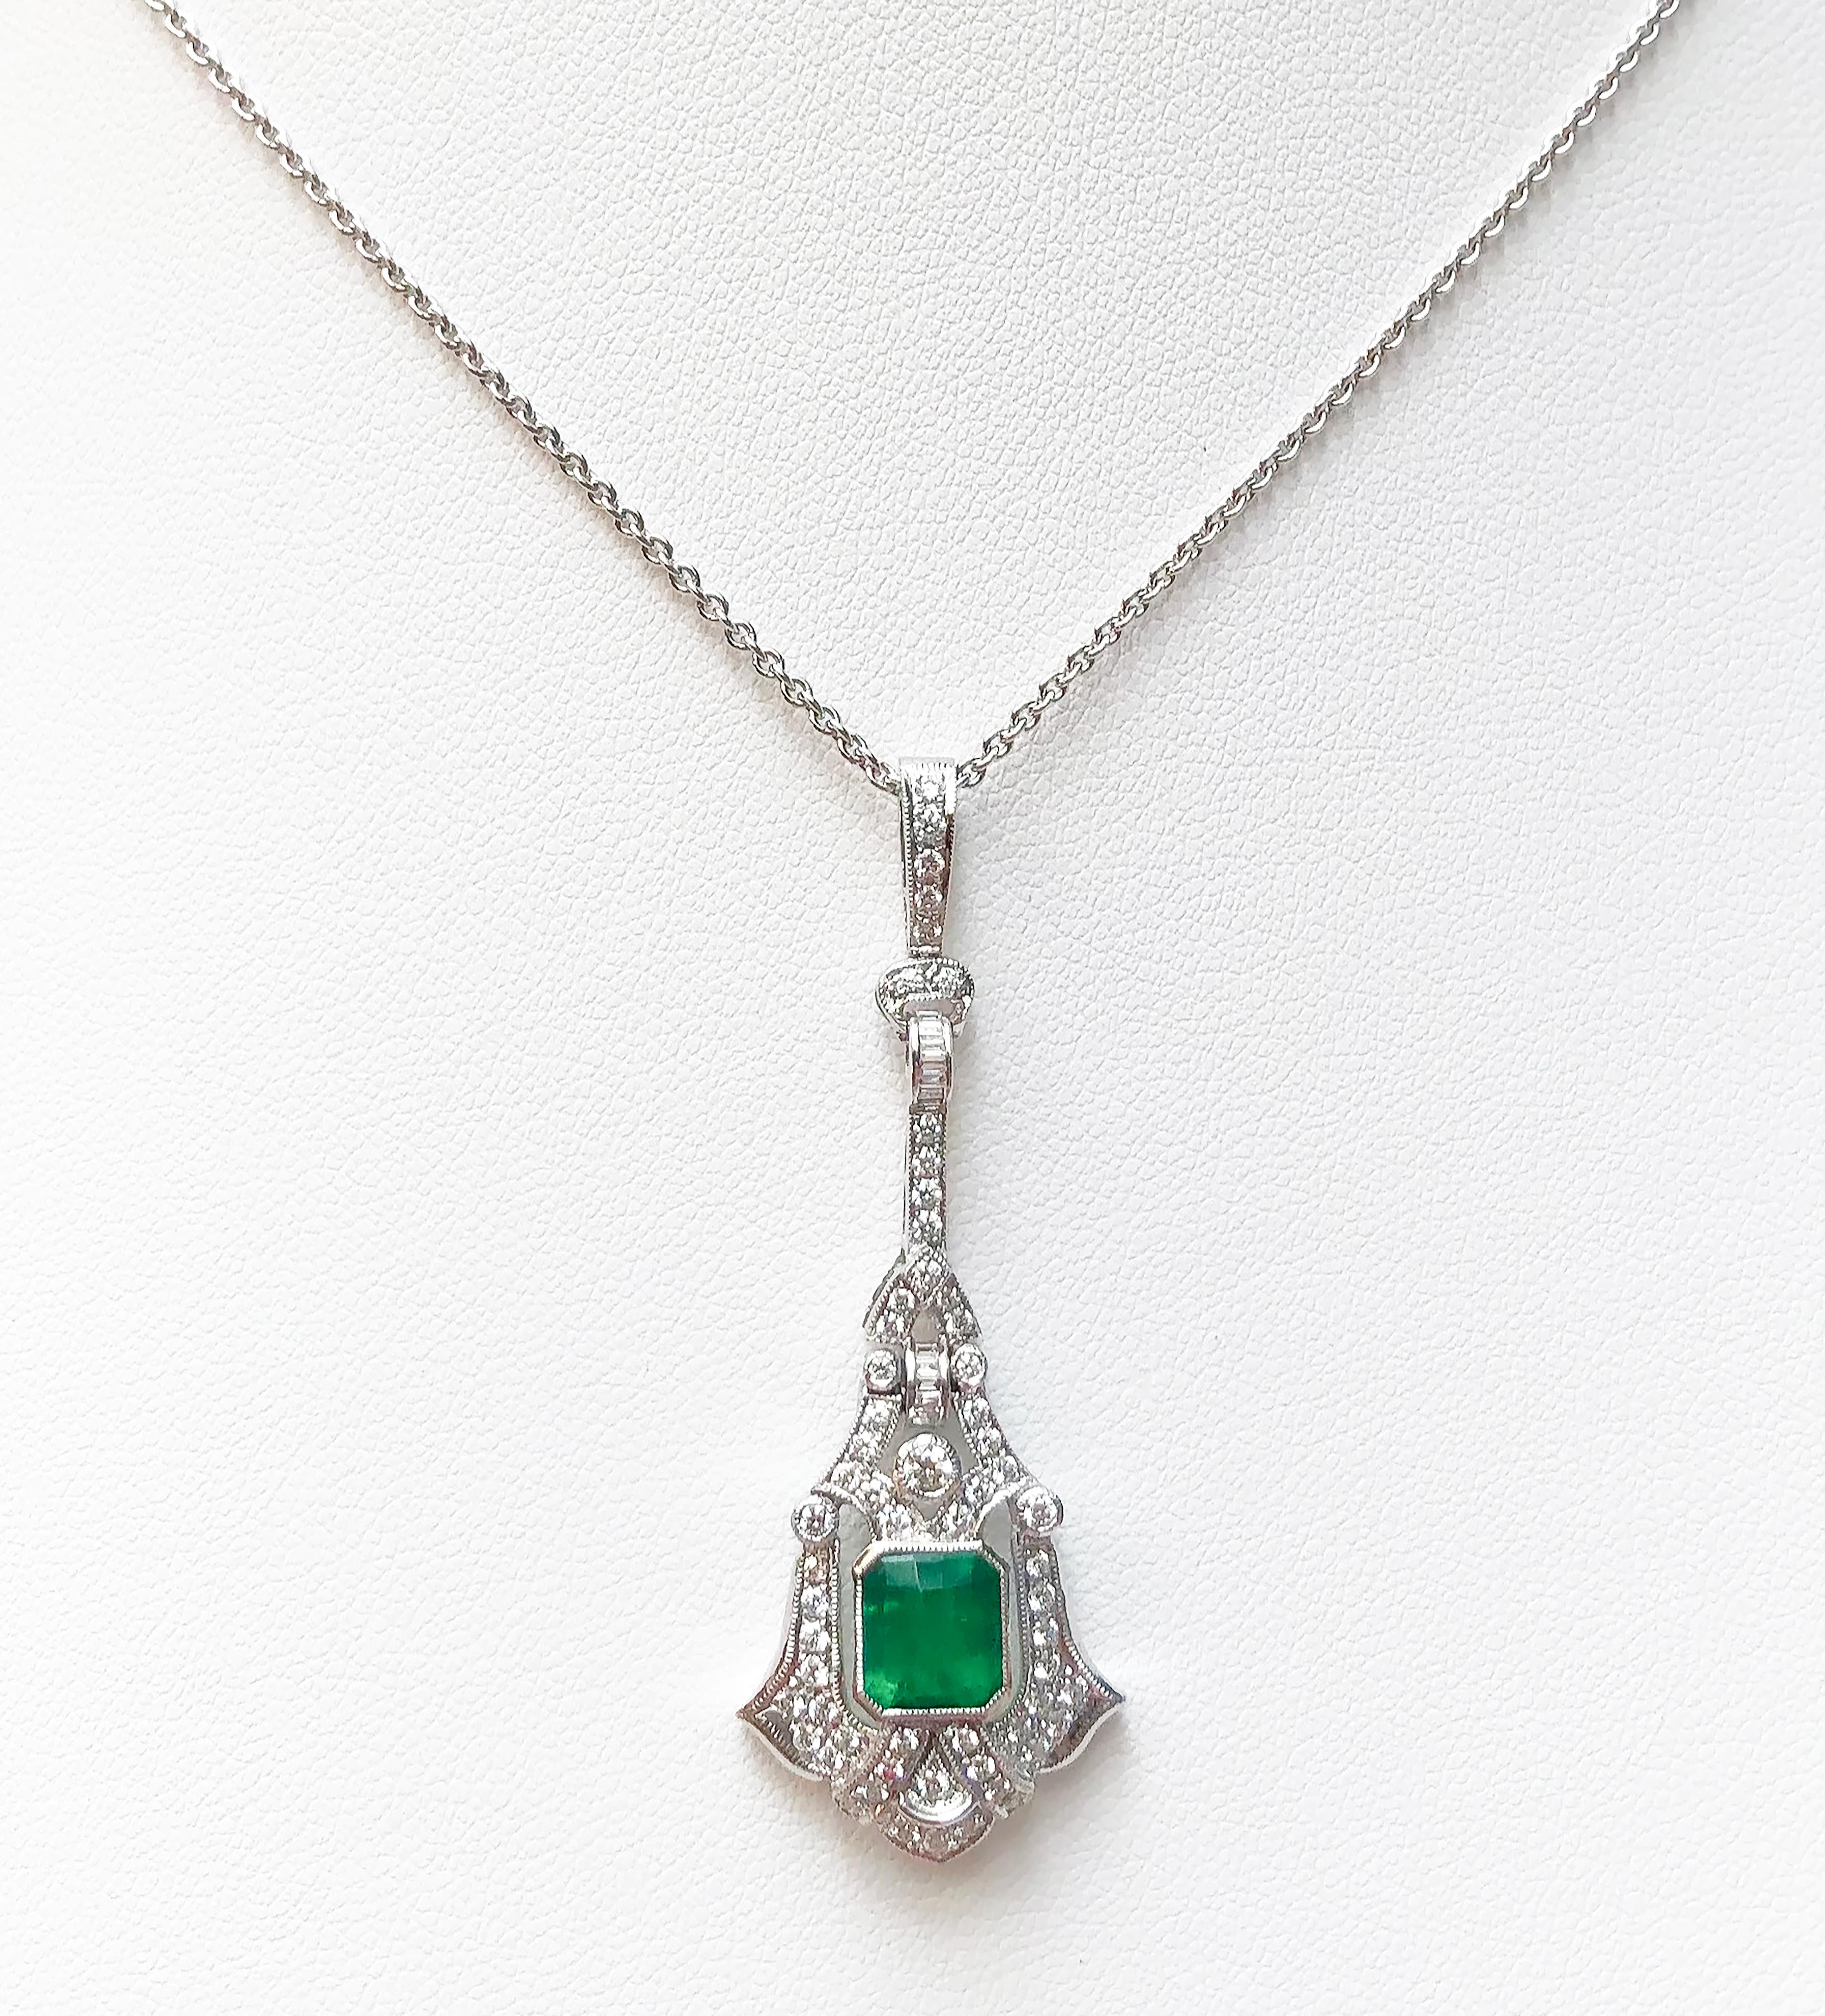 Emerald 1.09 carats with Diamond 0.70 carat Pendant set in 18 Karat White Gold Settings
(chain not included)

Width:  1.9 cm 
Length: 5.0 cm
Total Weight: 5.47 grams

